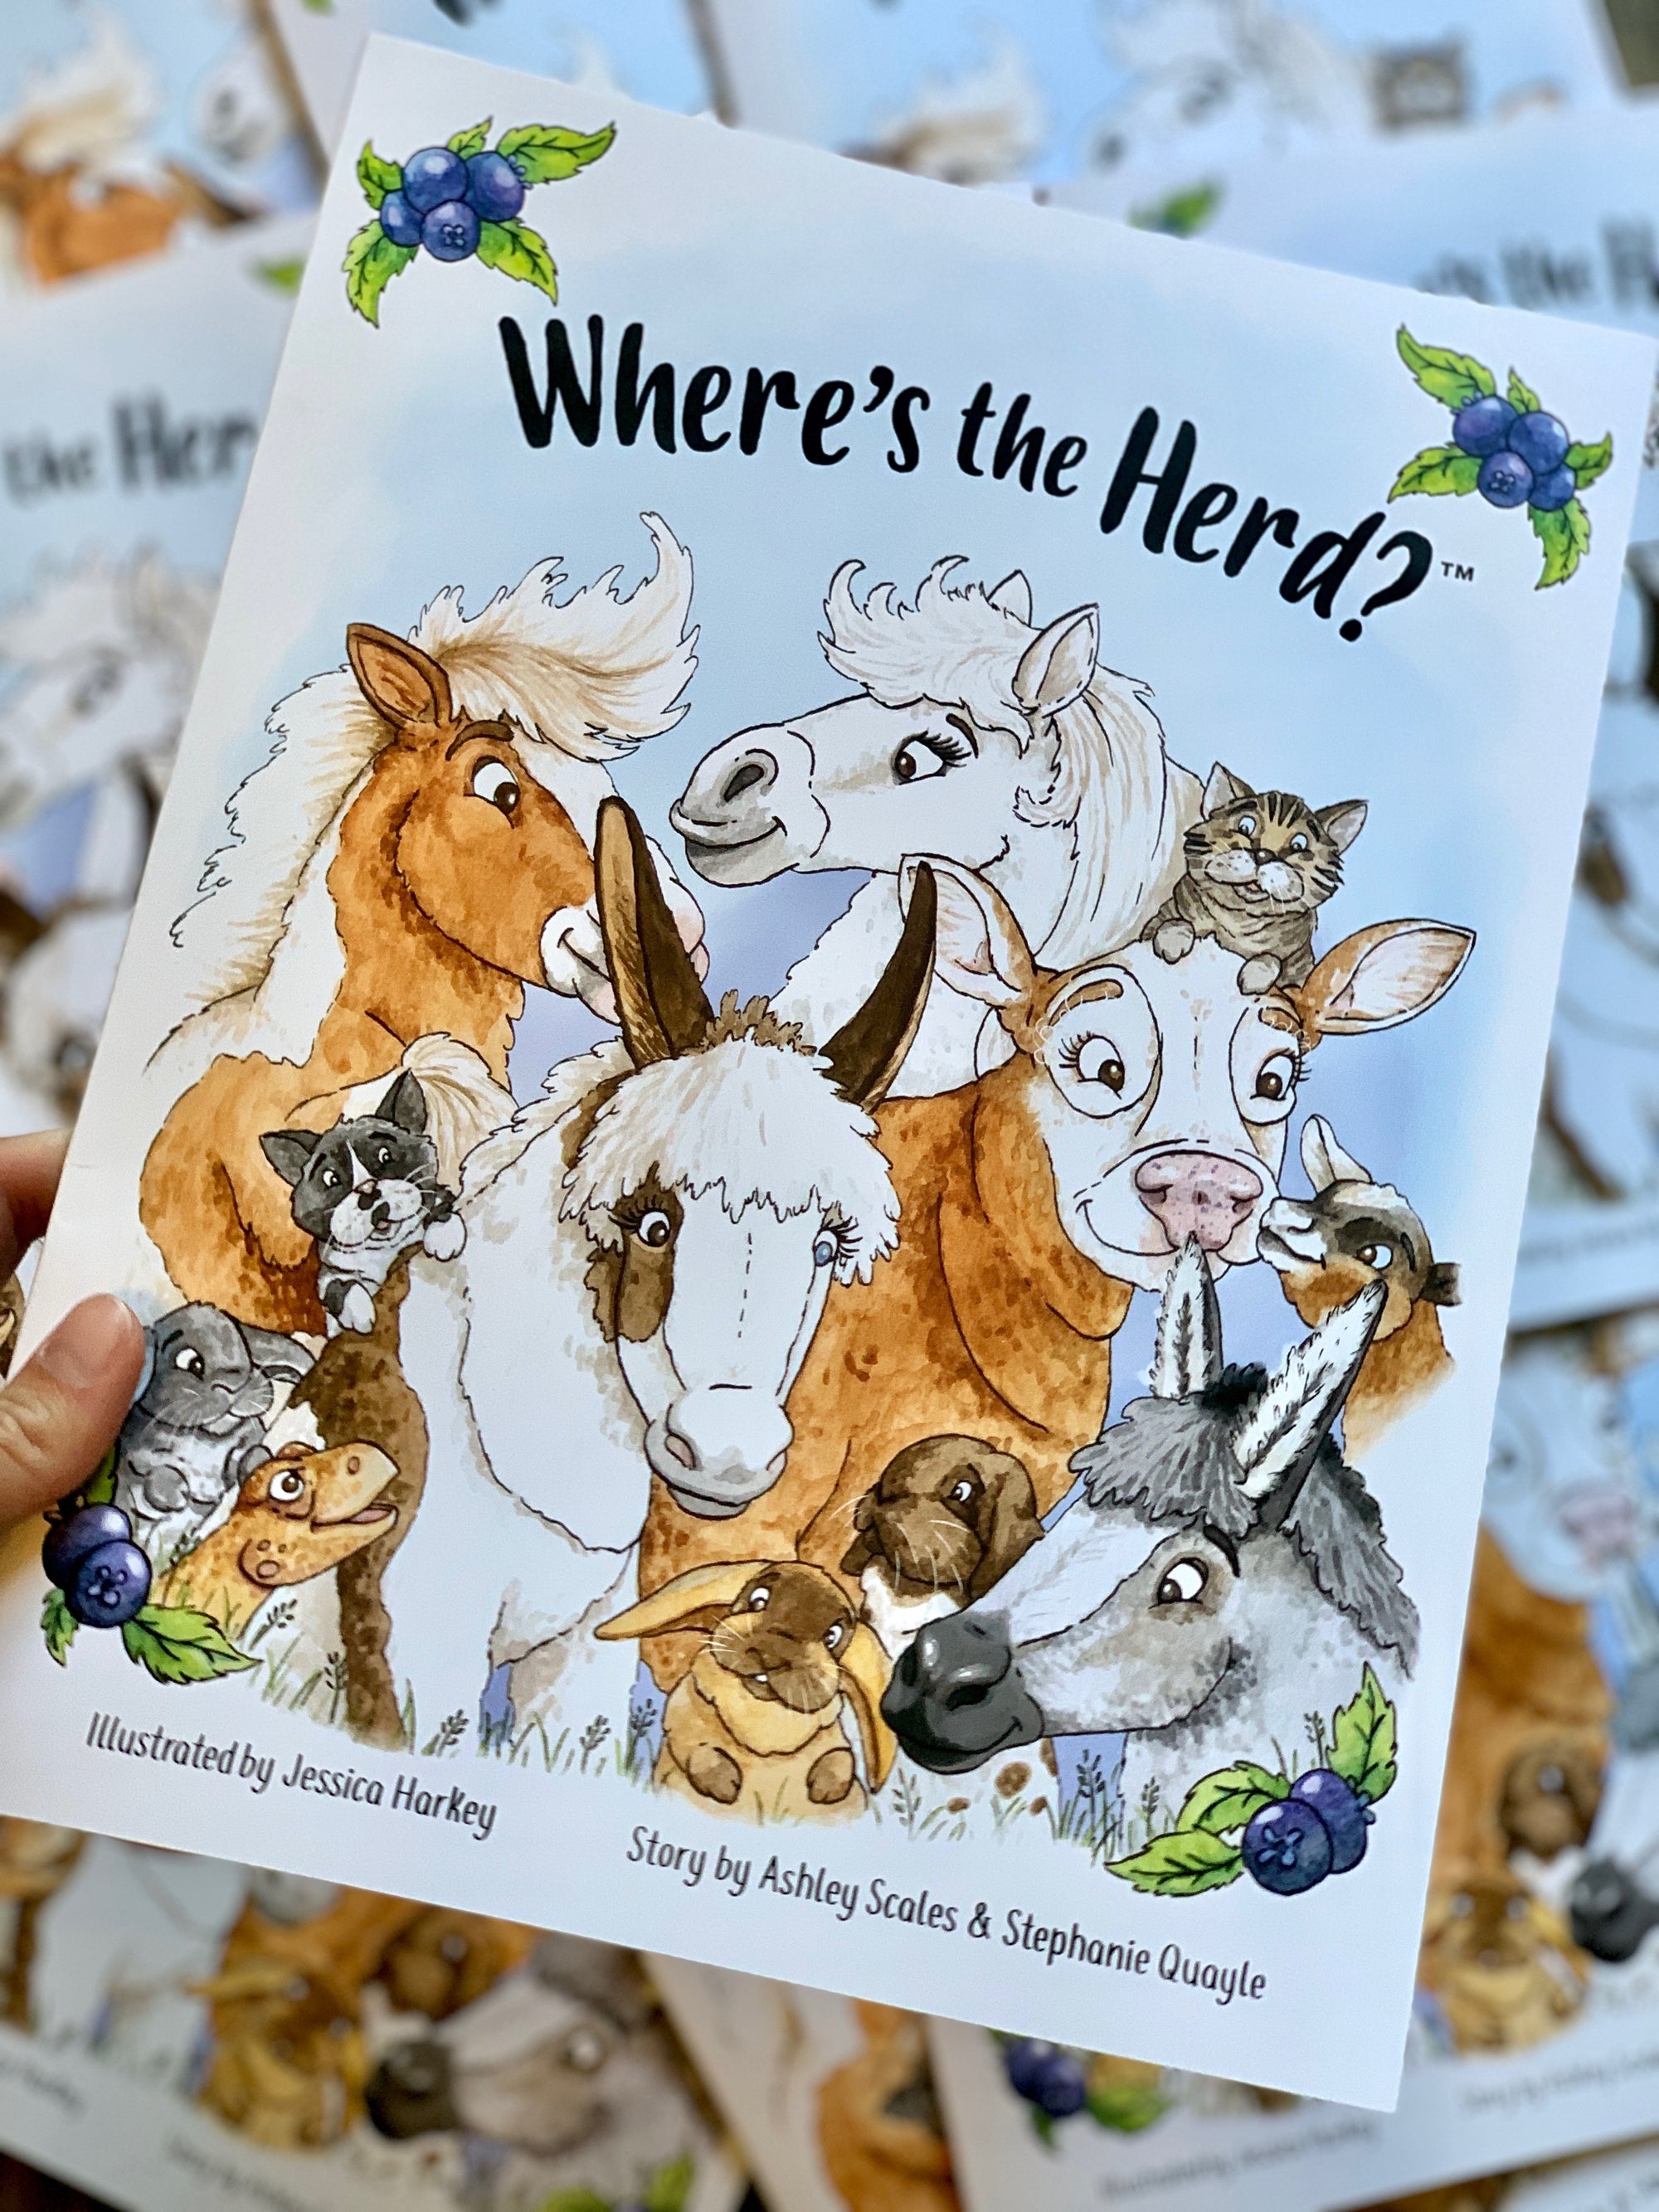 Where's the Herd? Book